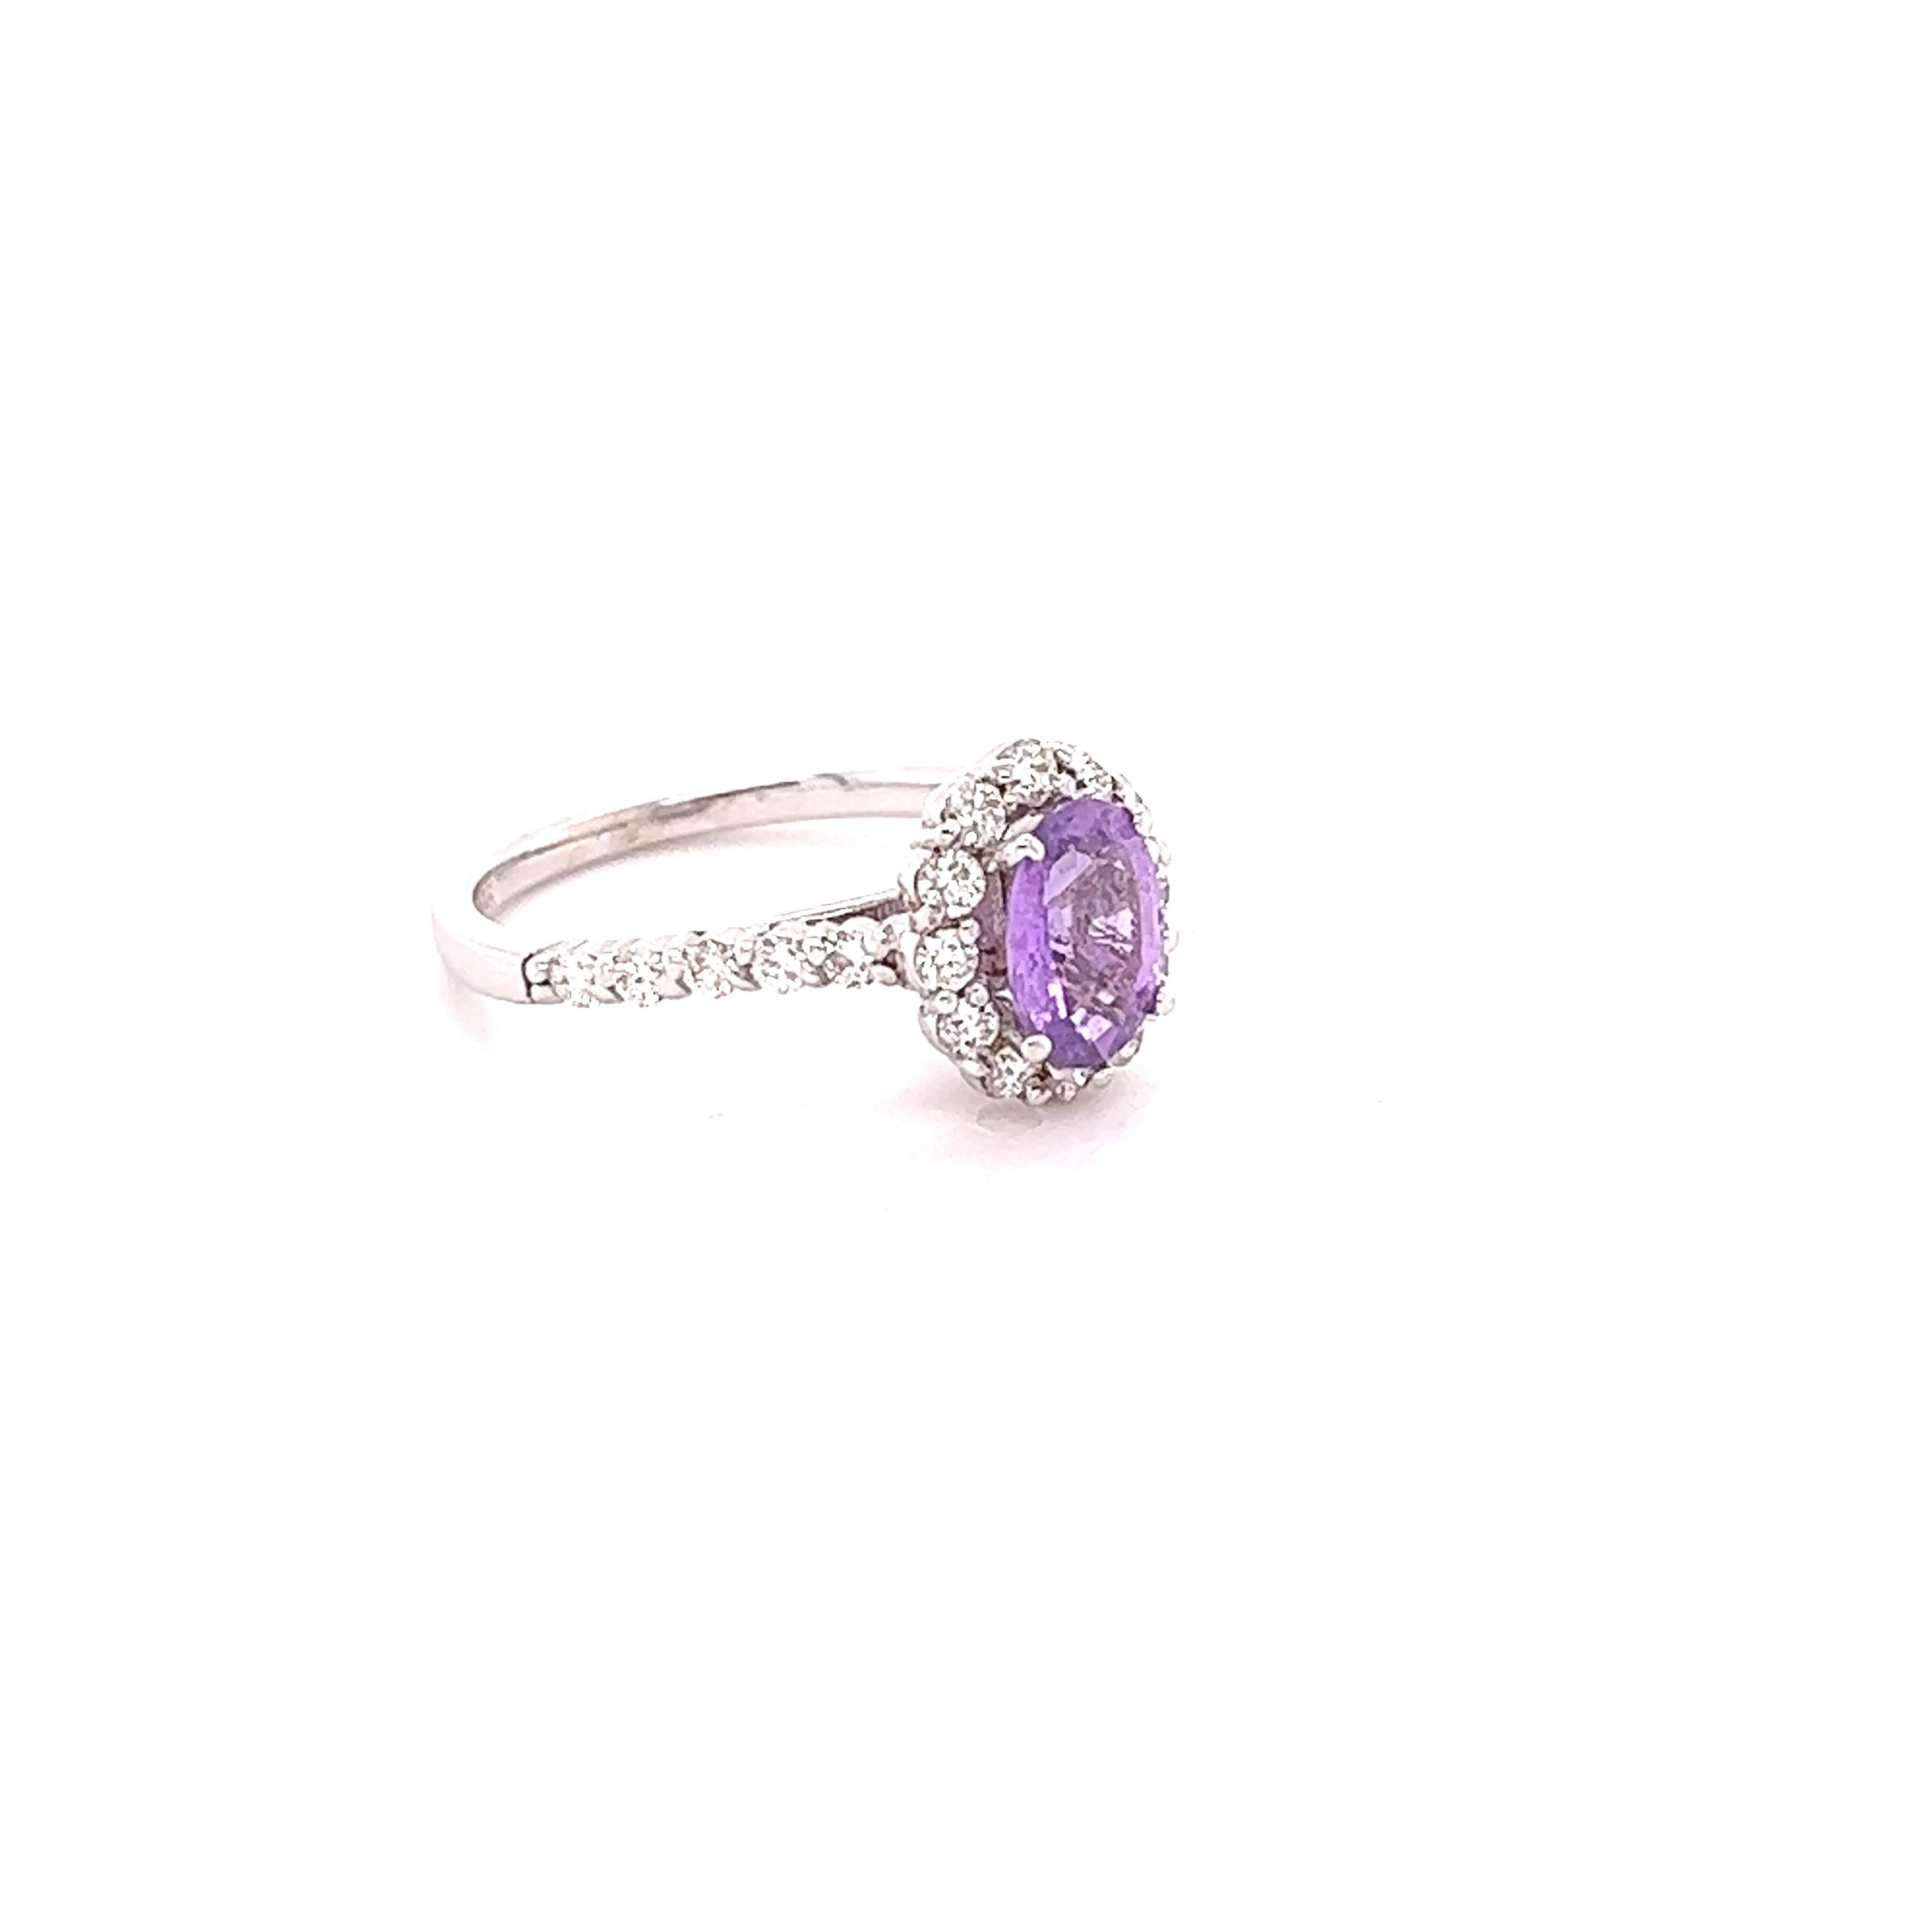 This beautiful ring has a Natural Oval Cut Pink Sapphire that weights 1.31 Carats. 

The ring is embellished with 22 Round Cut Diamonds that weigh 0.61 Carats with a clarity and color of VS/H. The total carat weight of the ring is 1.92 Carats. 

The